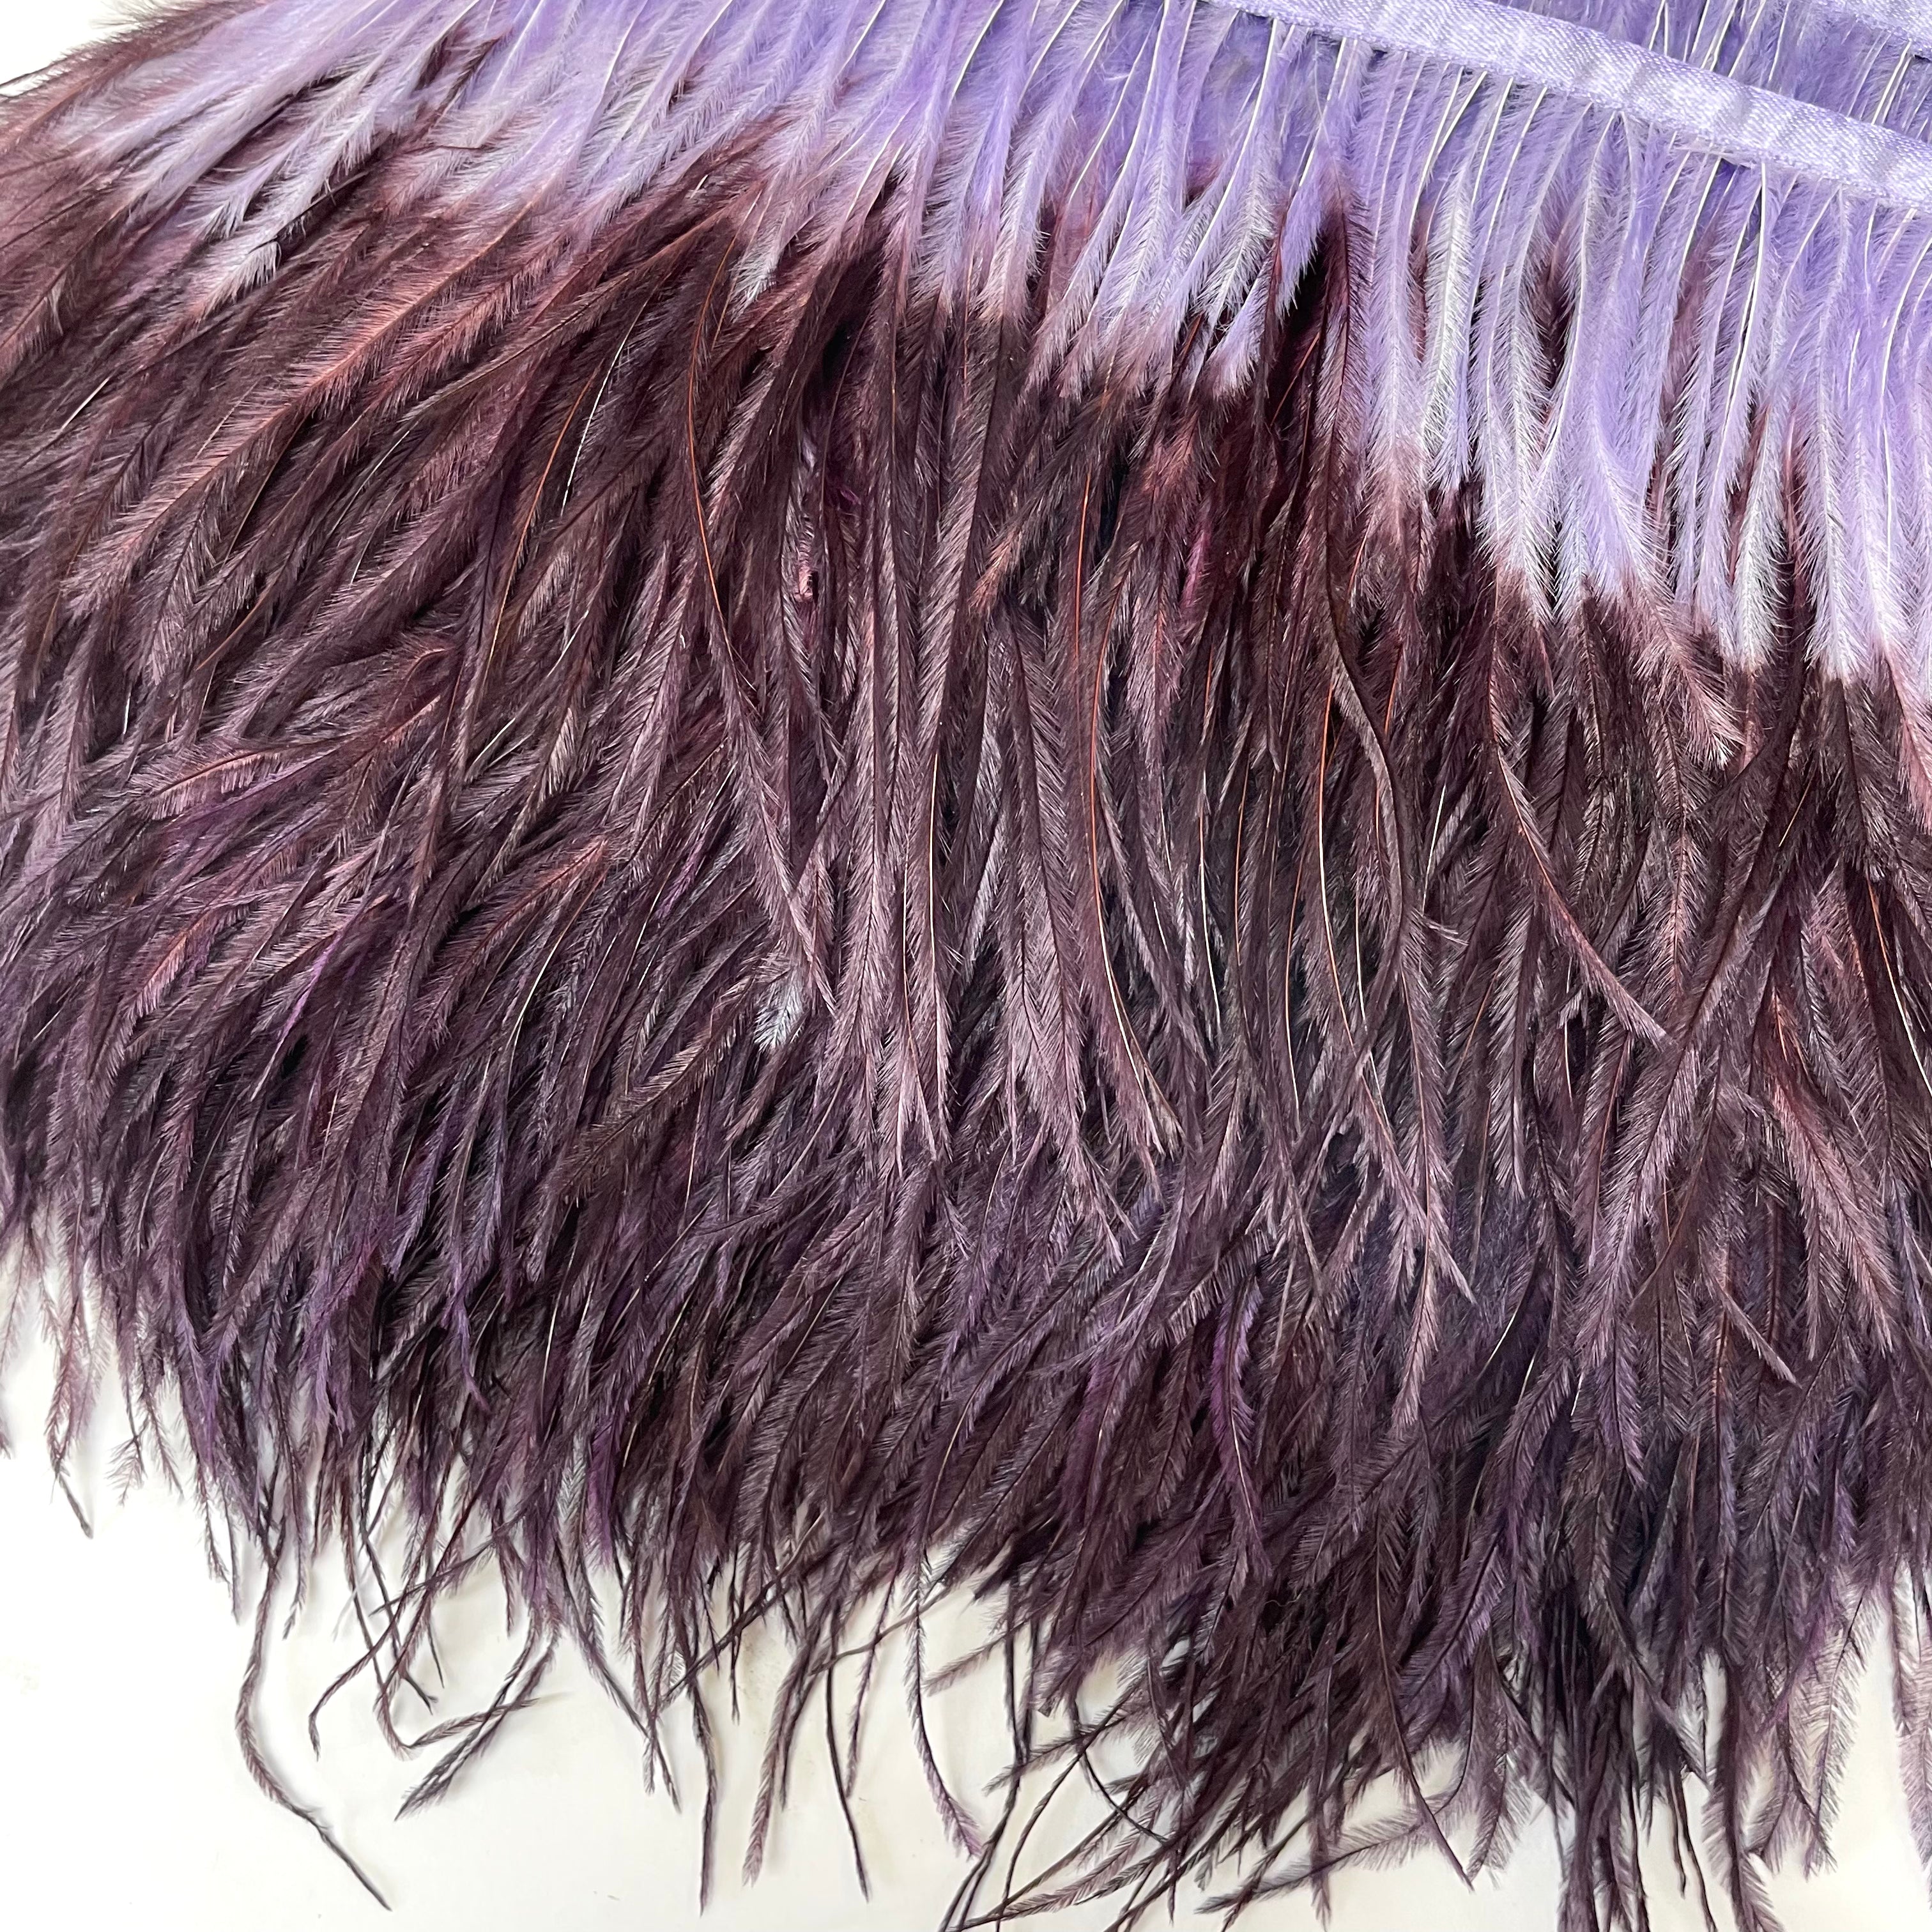 Ostrich Feathers Strung per metre - Two Tone Lilac / Eggplant